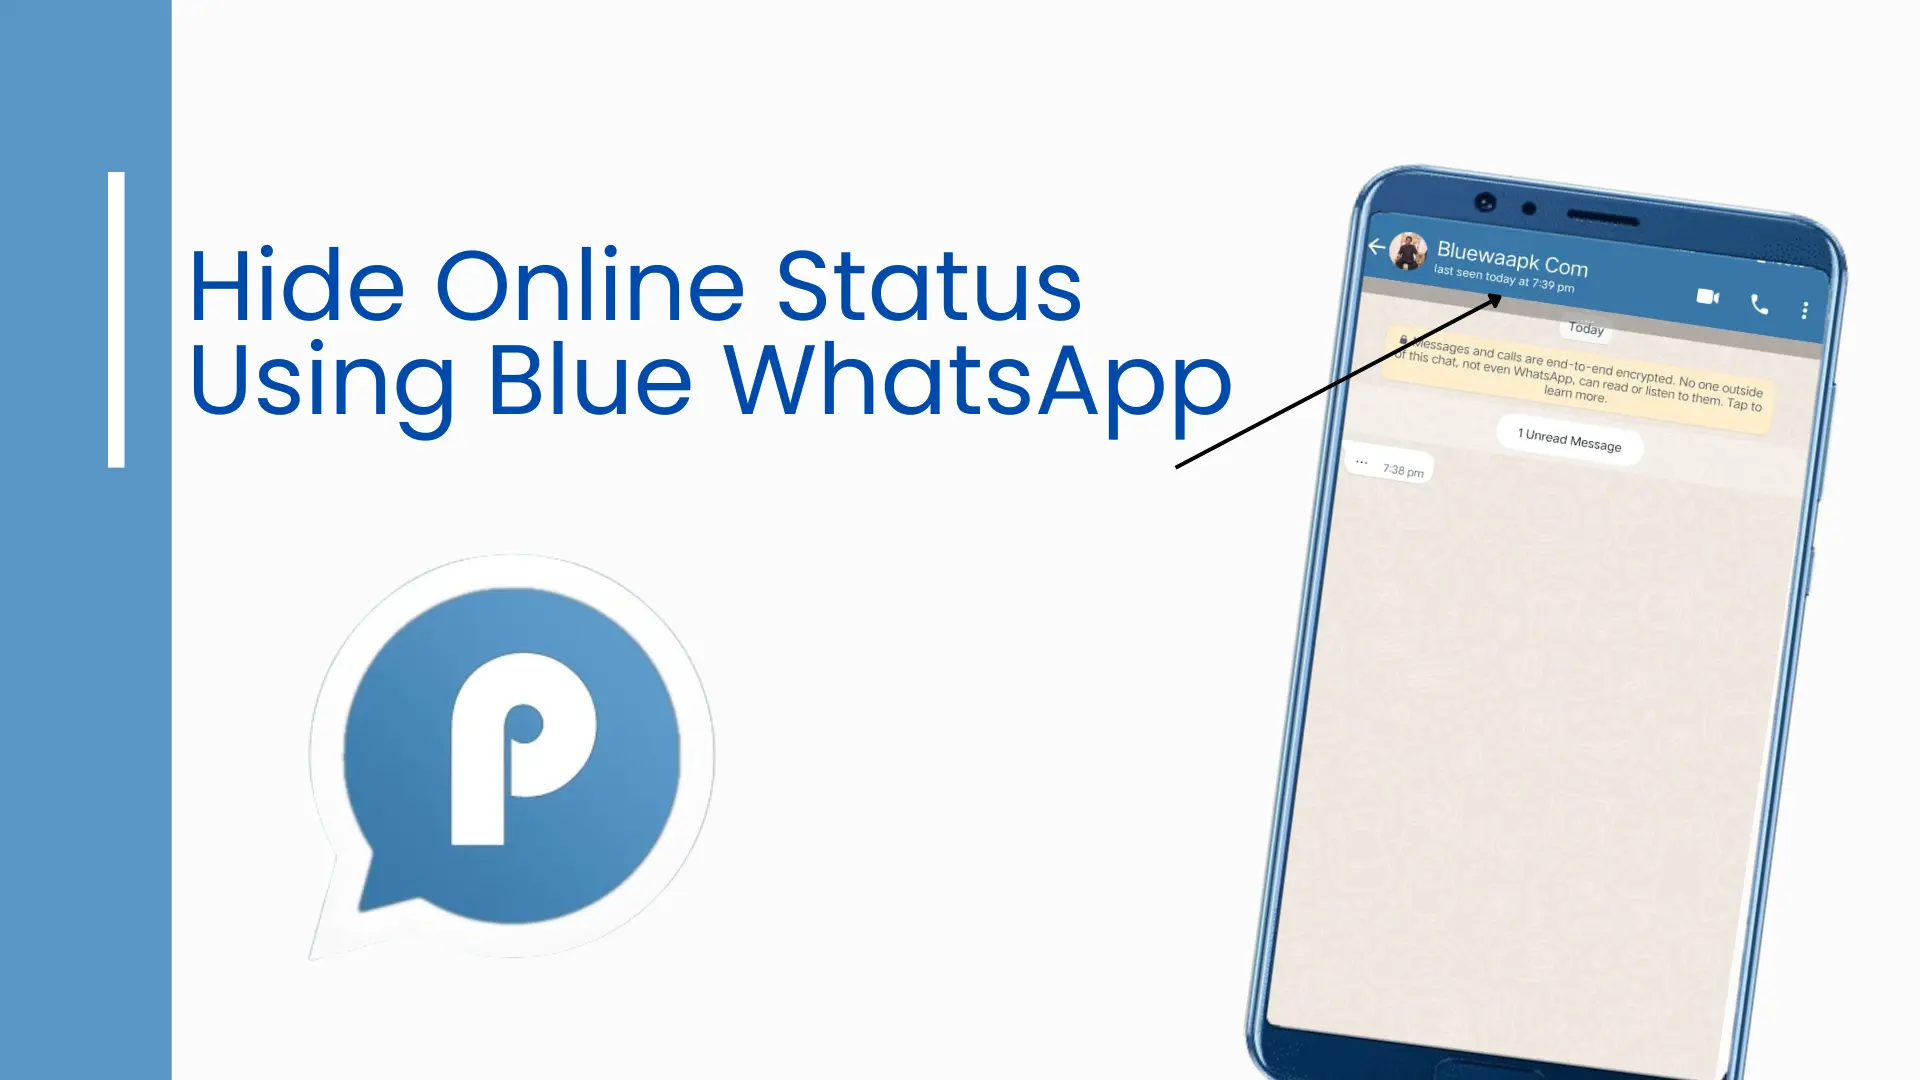 hide your online status on Blue WhatsApp- step by step guide.